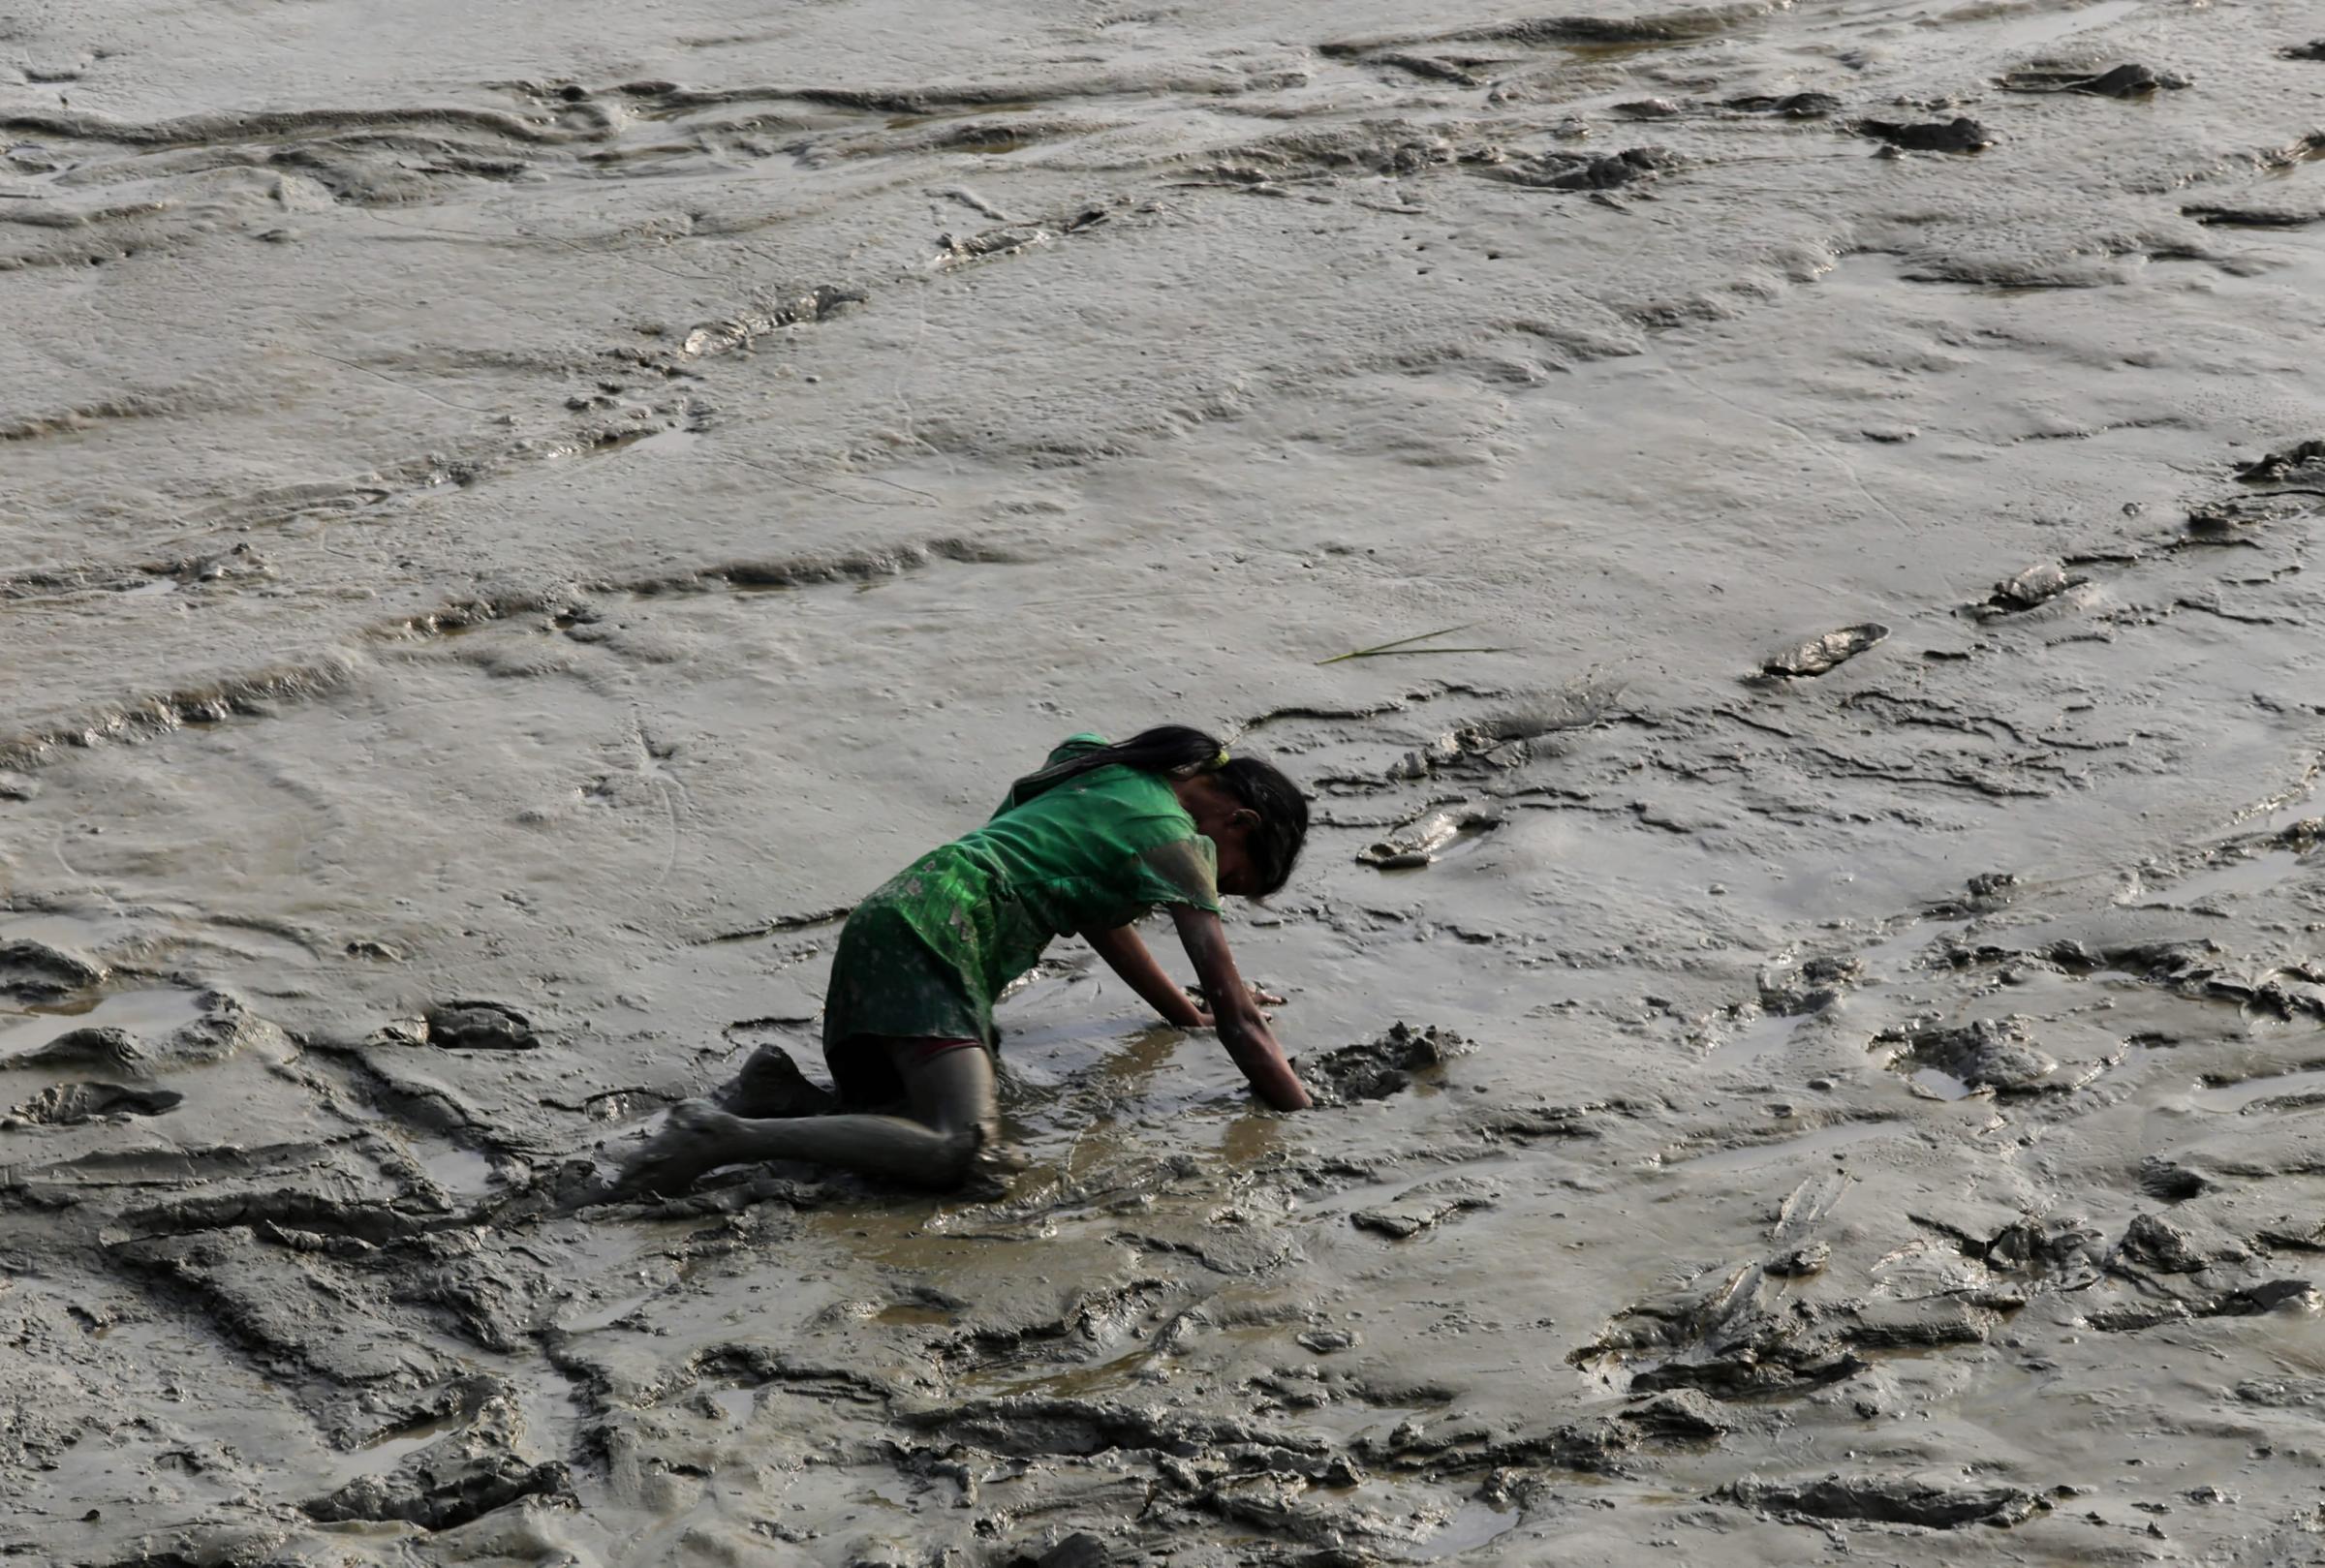 An Indian girl tries to pick up a coin in the mud of the Ganges River at Harwood point, 90 kms south of Calcutta, eastern India, Jan. 12, 2014. Coins were offered by pilgrims on their way to take a holy dip at Gangasagar for the upcoming Gangasagar annual fair.